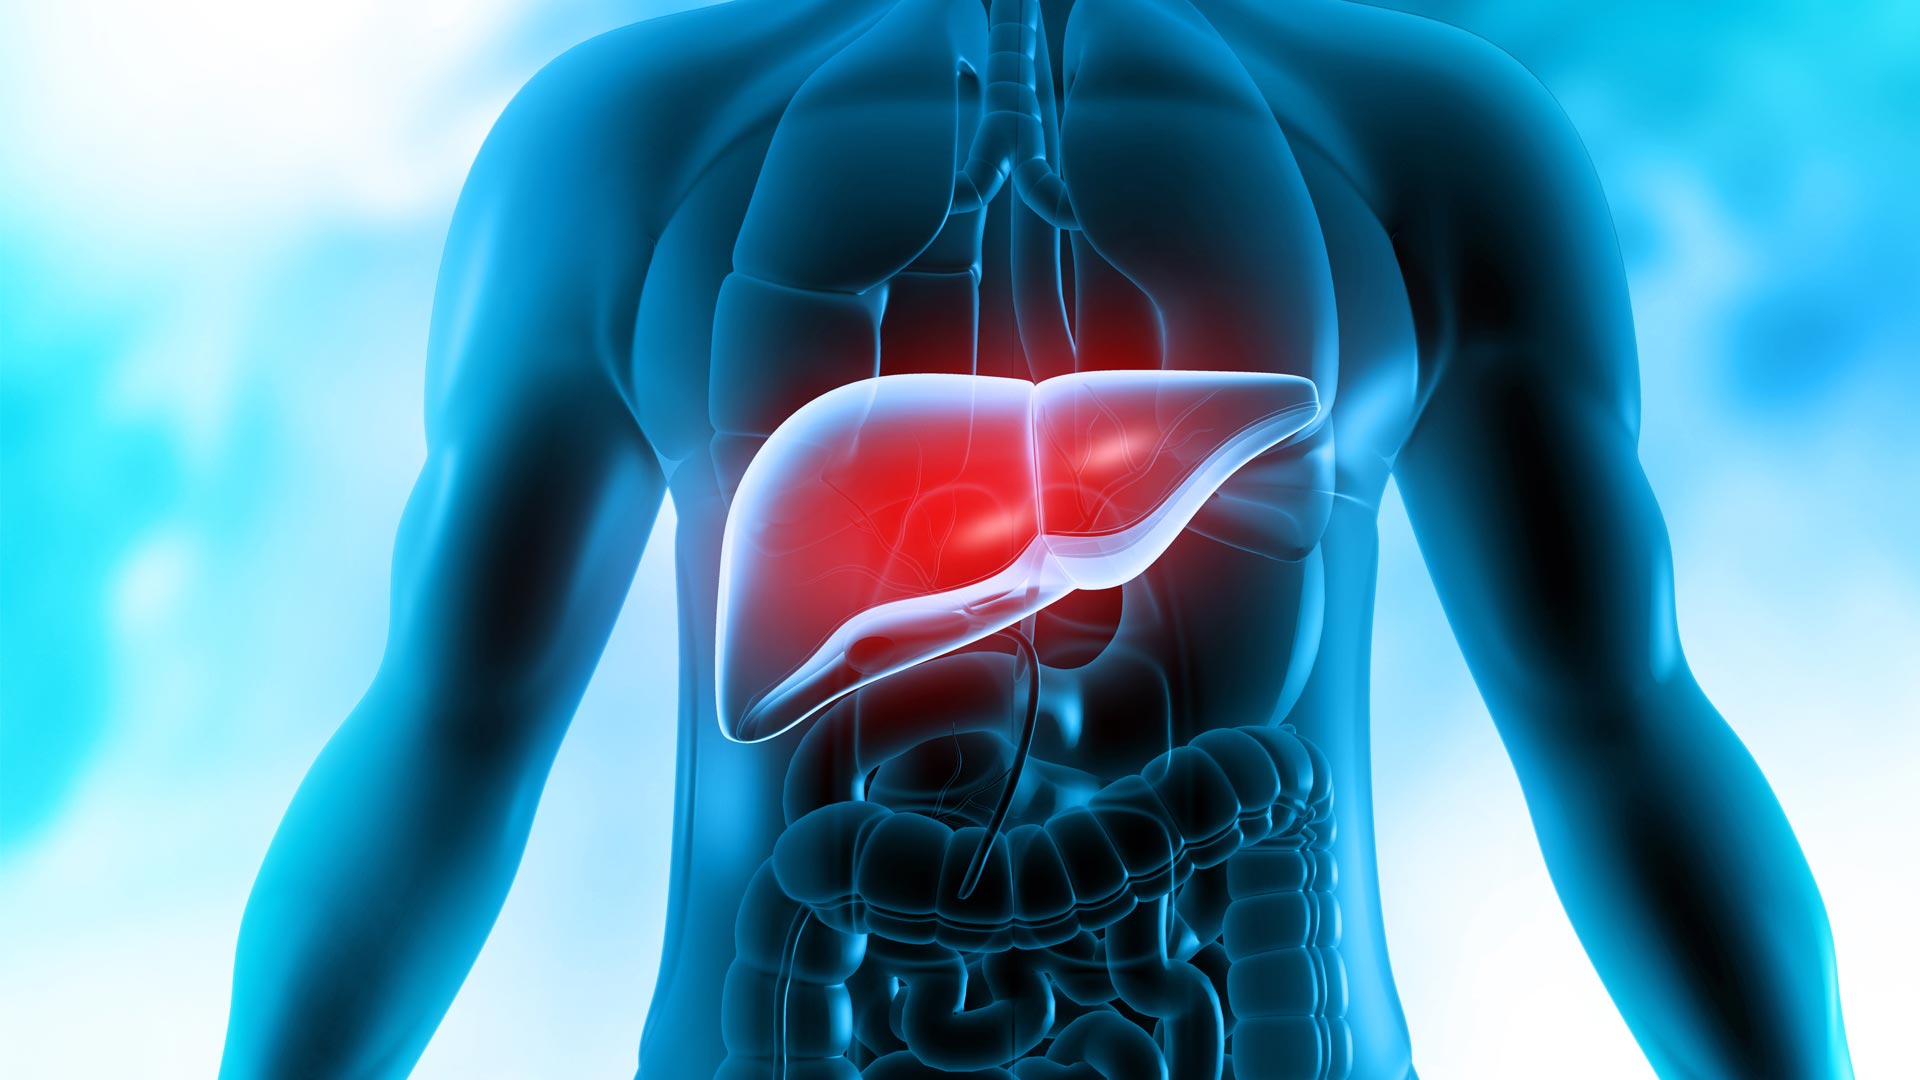 Using Cells to Treat Acute Liver Failure